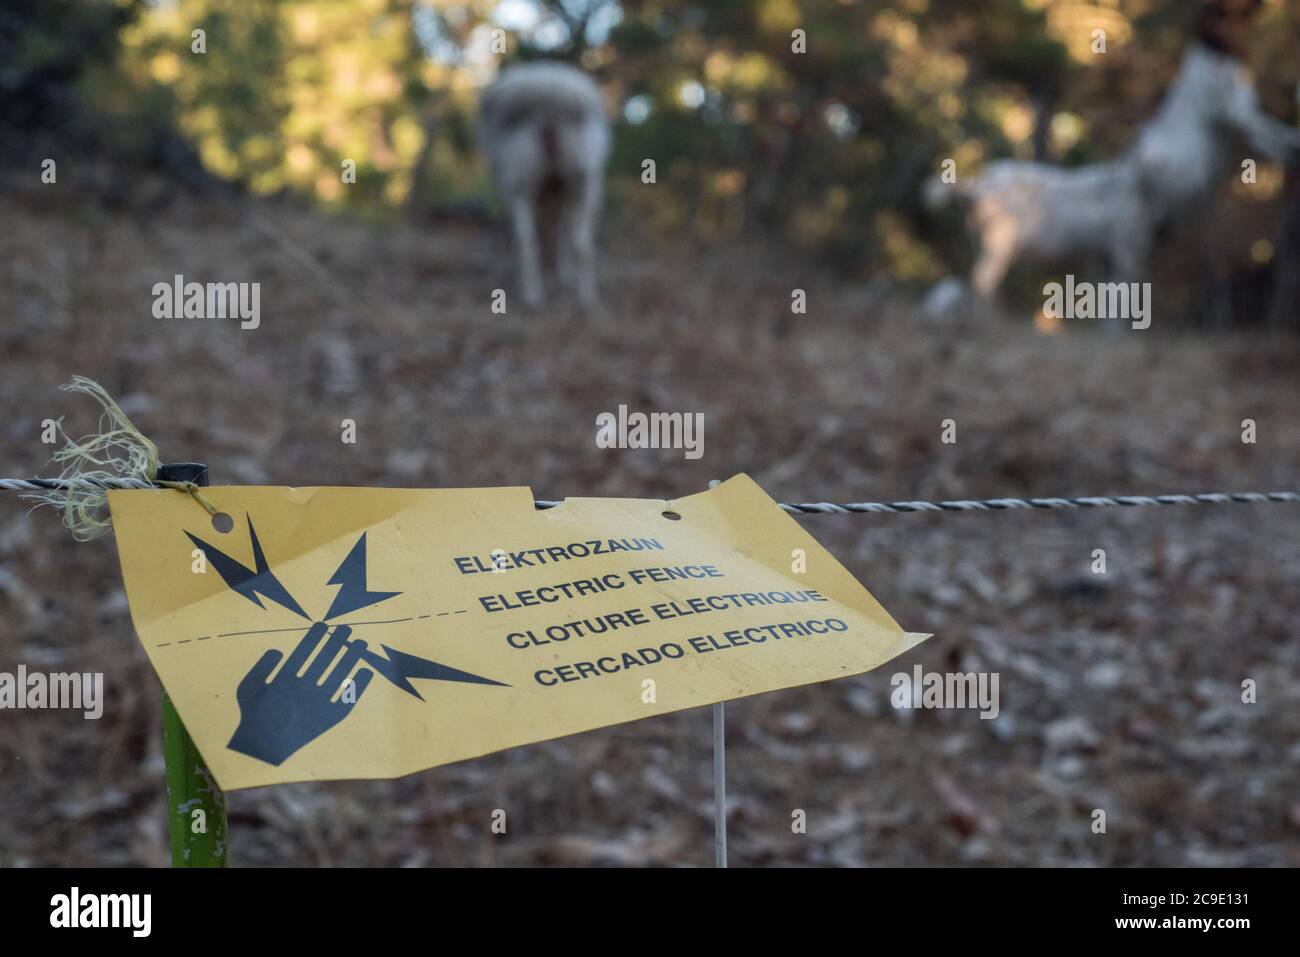 A sign warning of an electric fence keeping goats in a specific area, so they can eat vegetation in a form of fire mitigation. Stock Photo